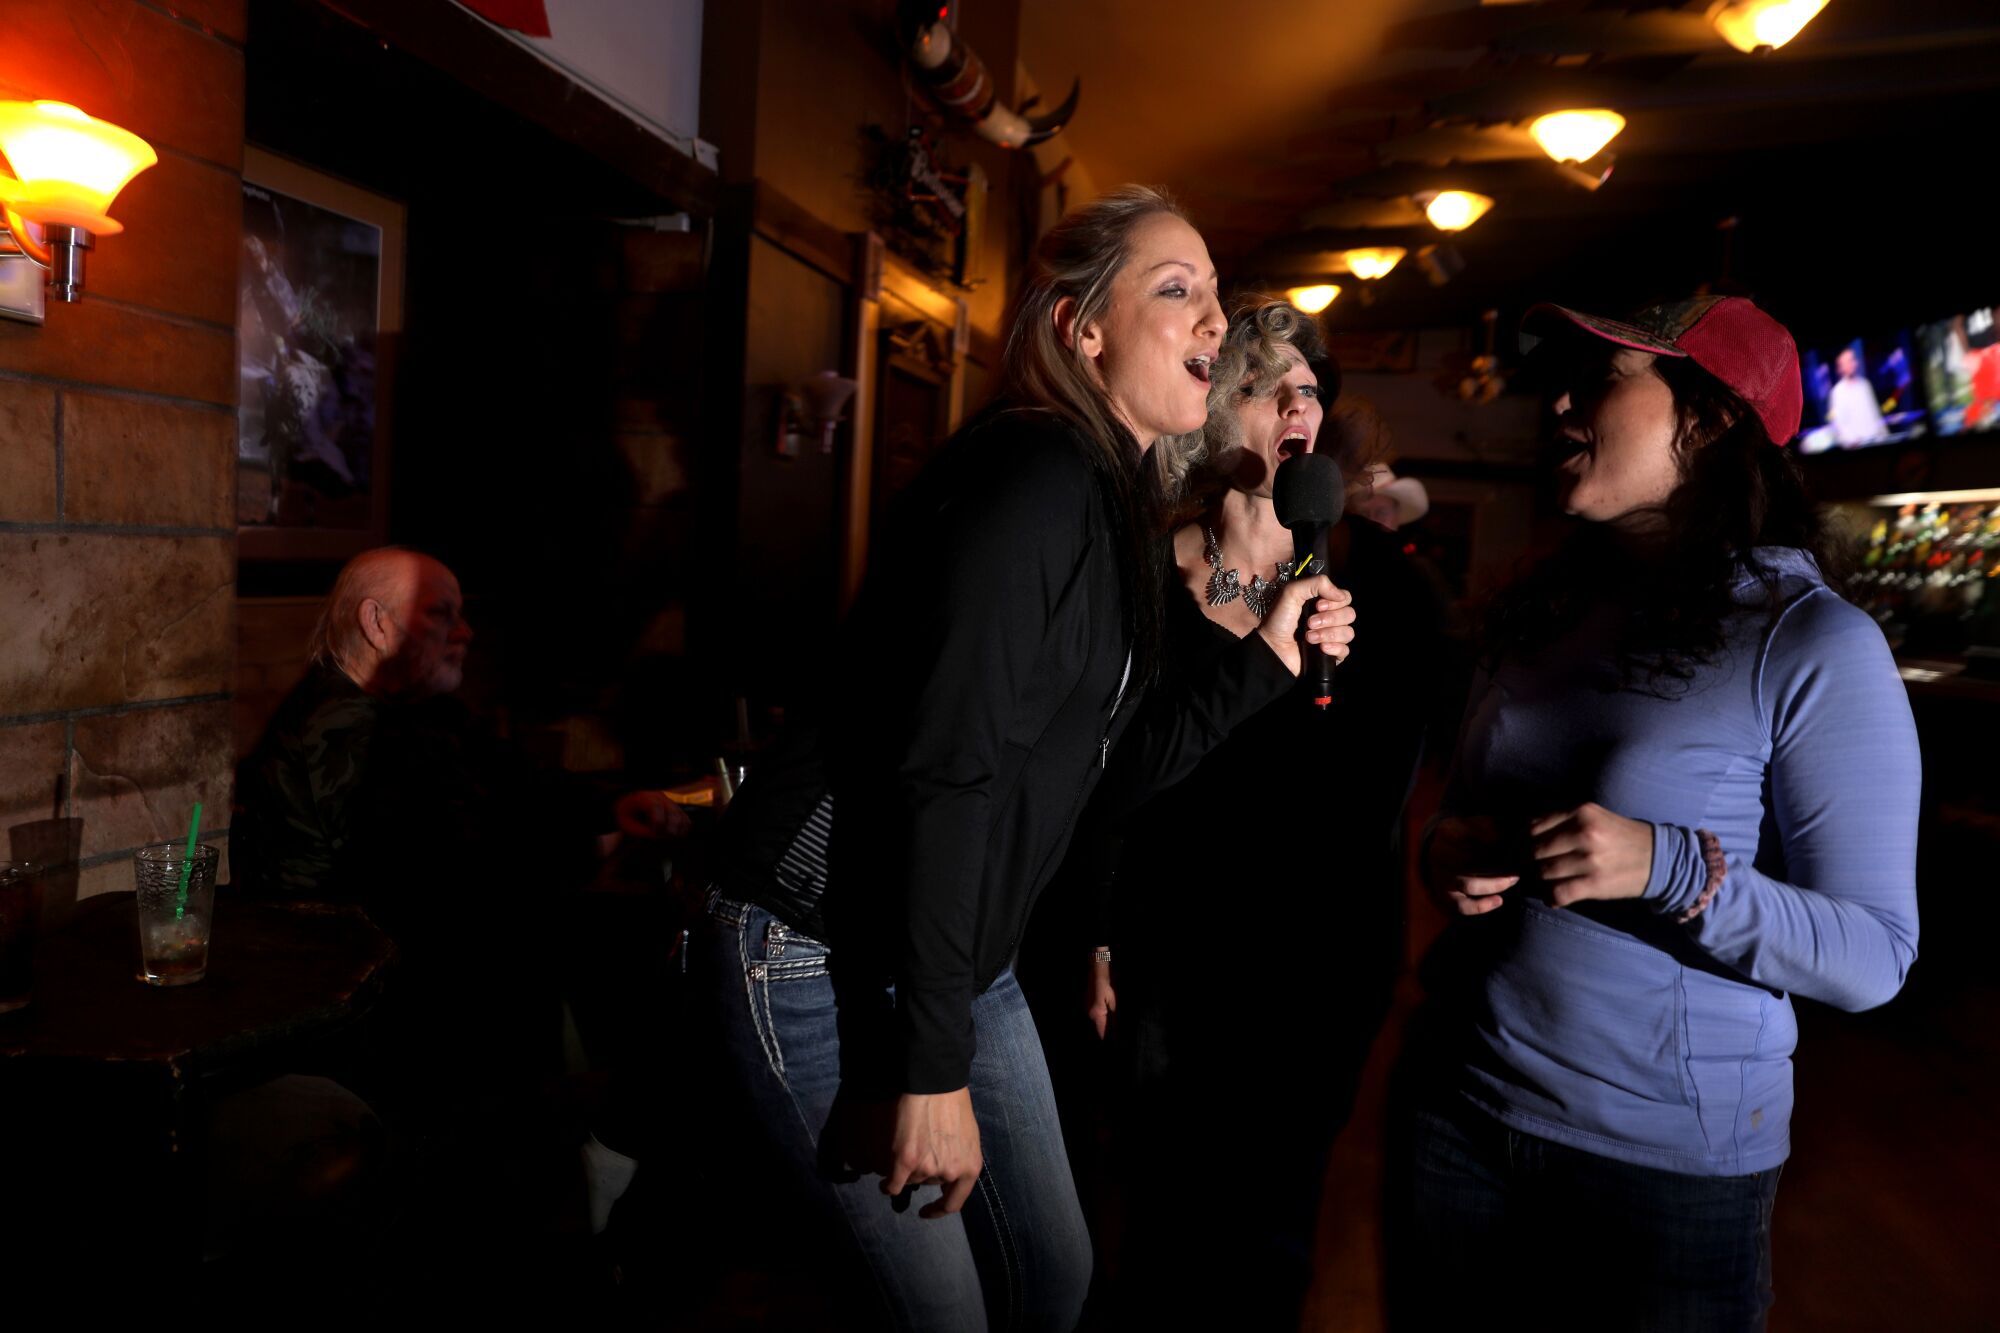 A group of women, none with masks, lean in to sing karaoke around one microphone in a bar